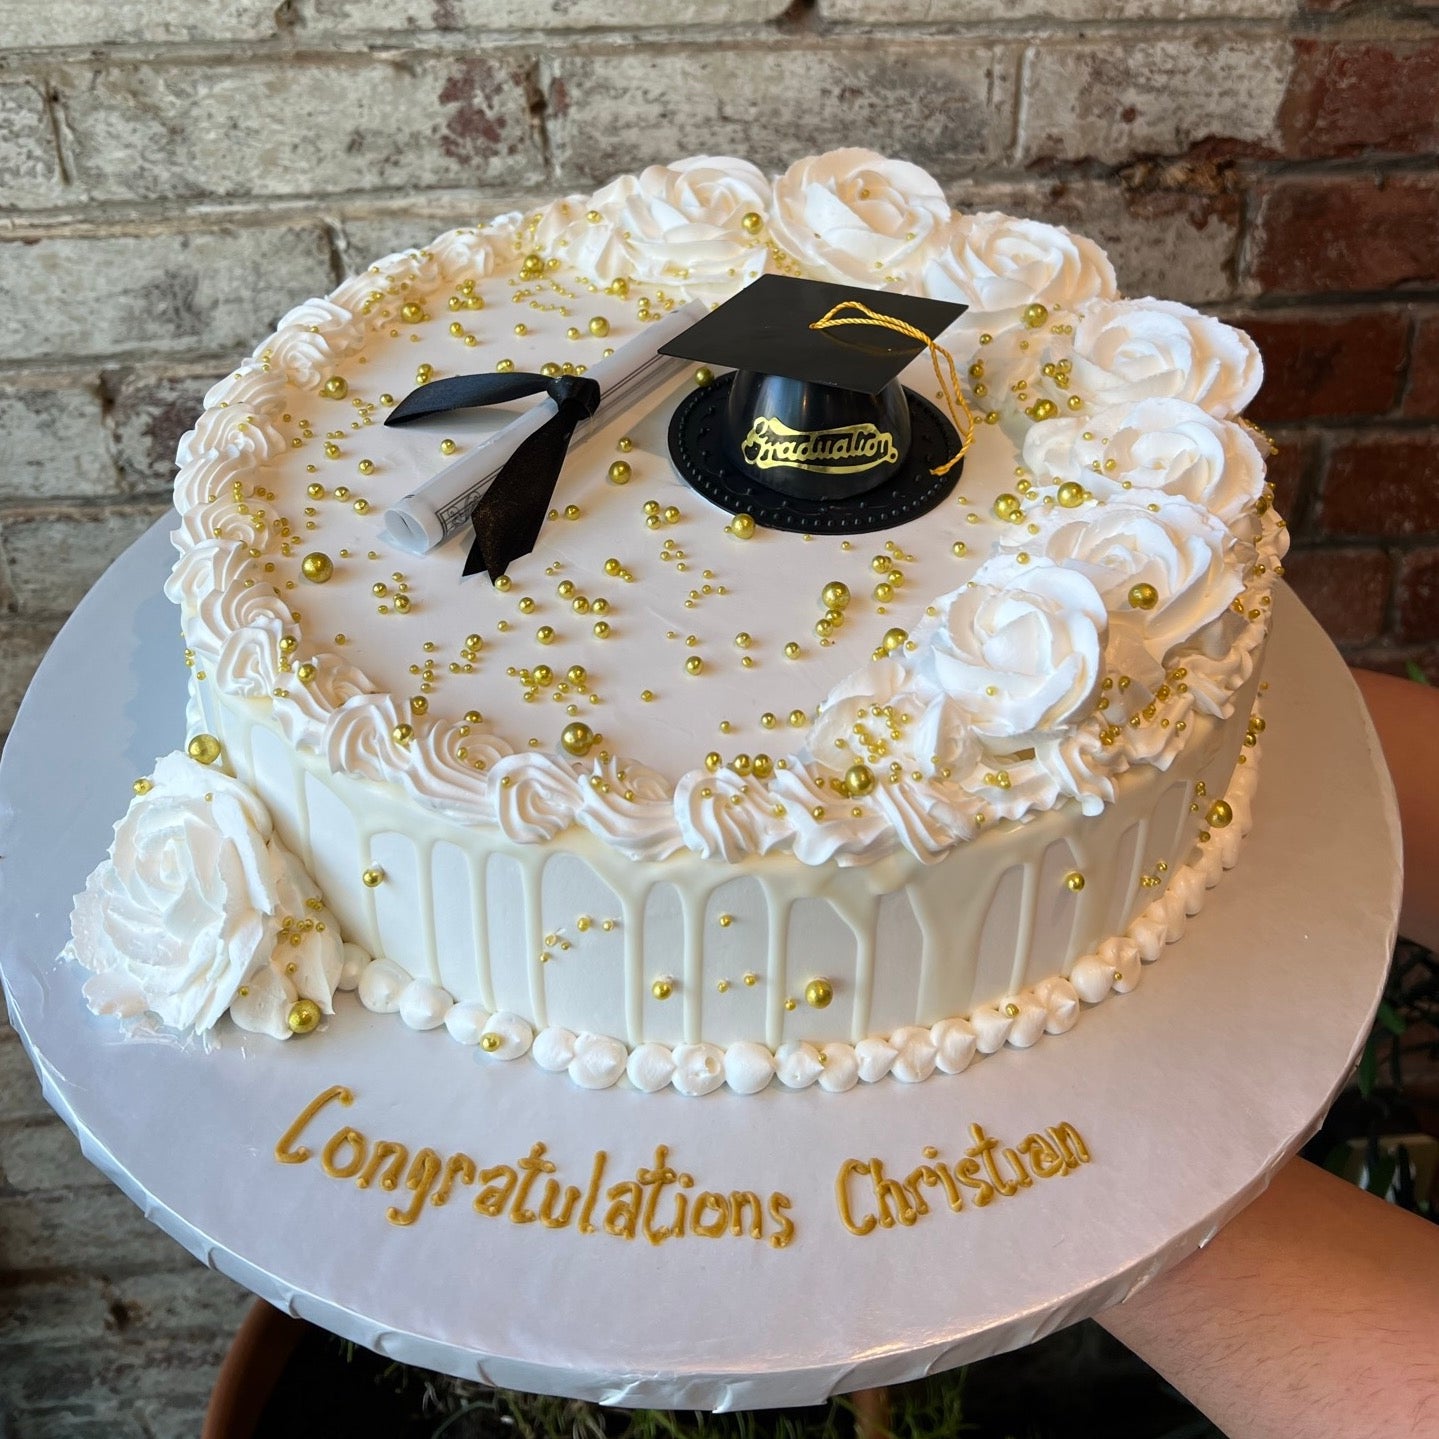 Graduate themed cake with cap and scroll